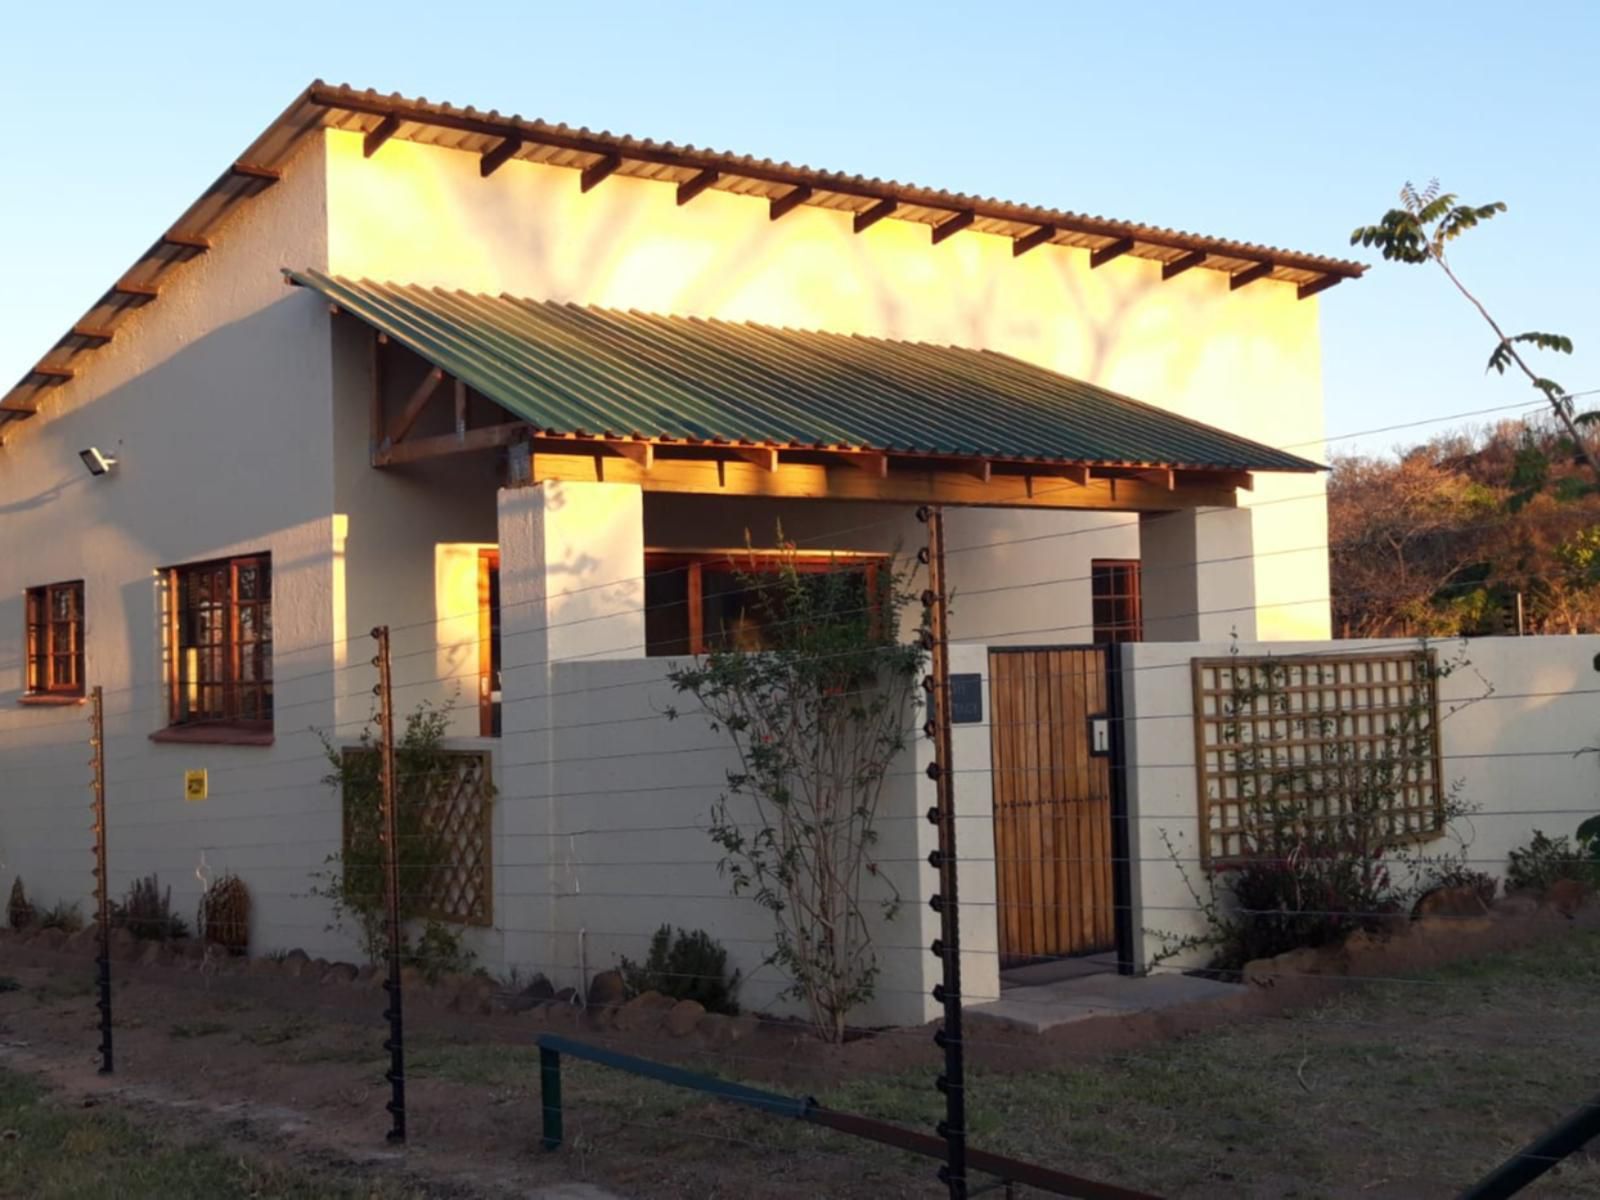 Bergdale Cottages Hazyview Mpumalanga South Africa House, Building, Architecture